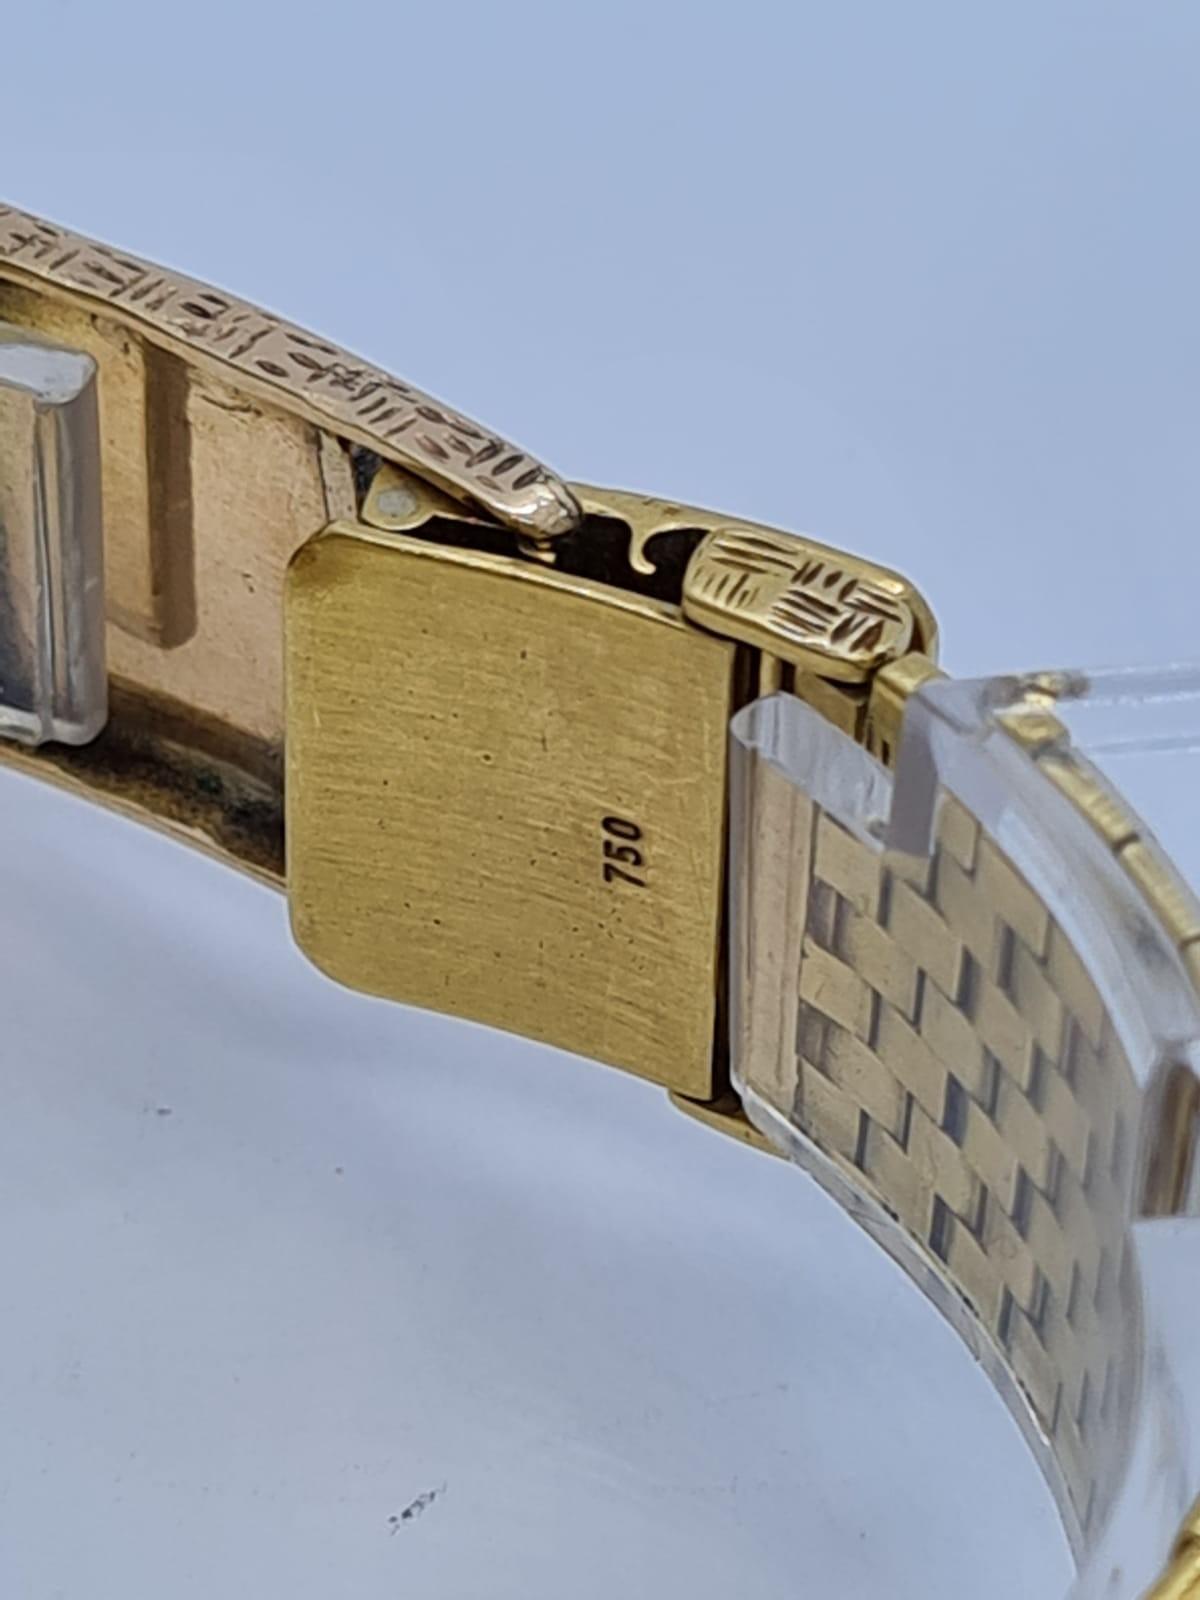 PATEK PHILIPPE GENEVE gent watch with blue face and 18k gold strap,36mm case 1970s model - Image 12 of 17